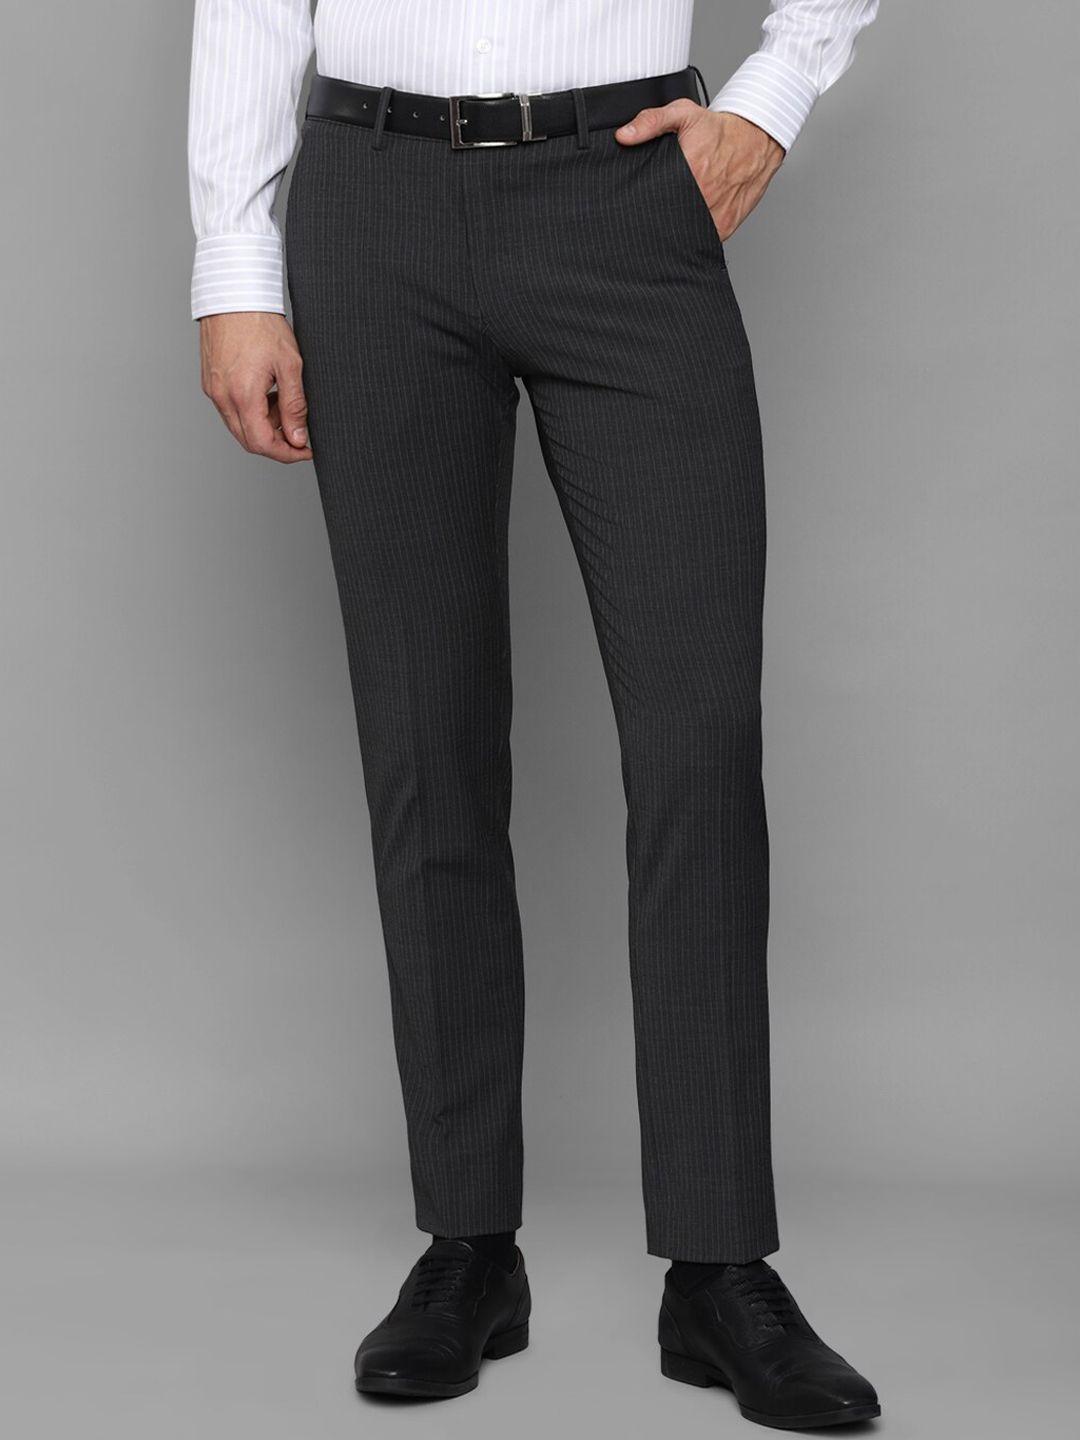 louis-philippe-men-grey-striped-slim-fit-trousers